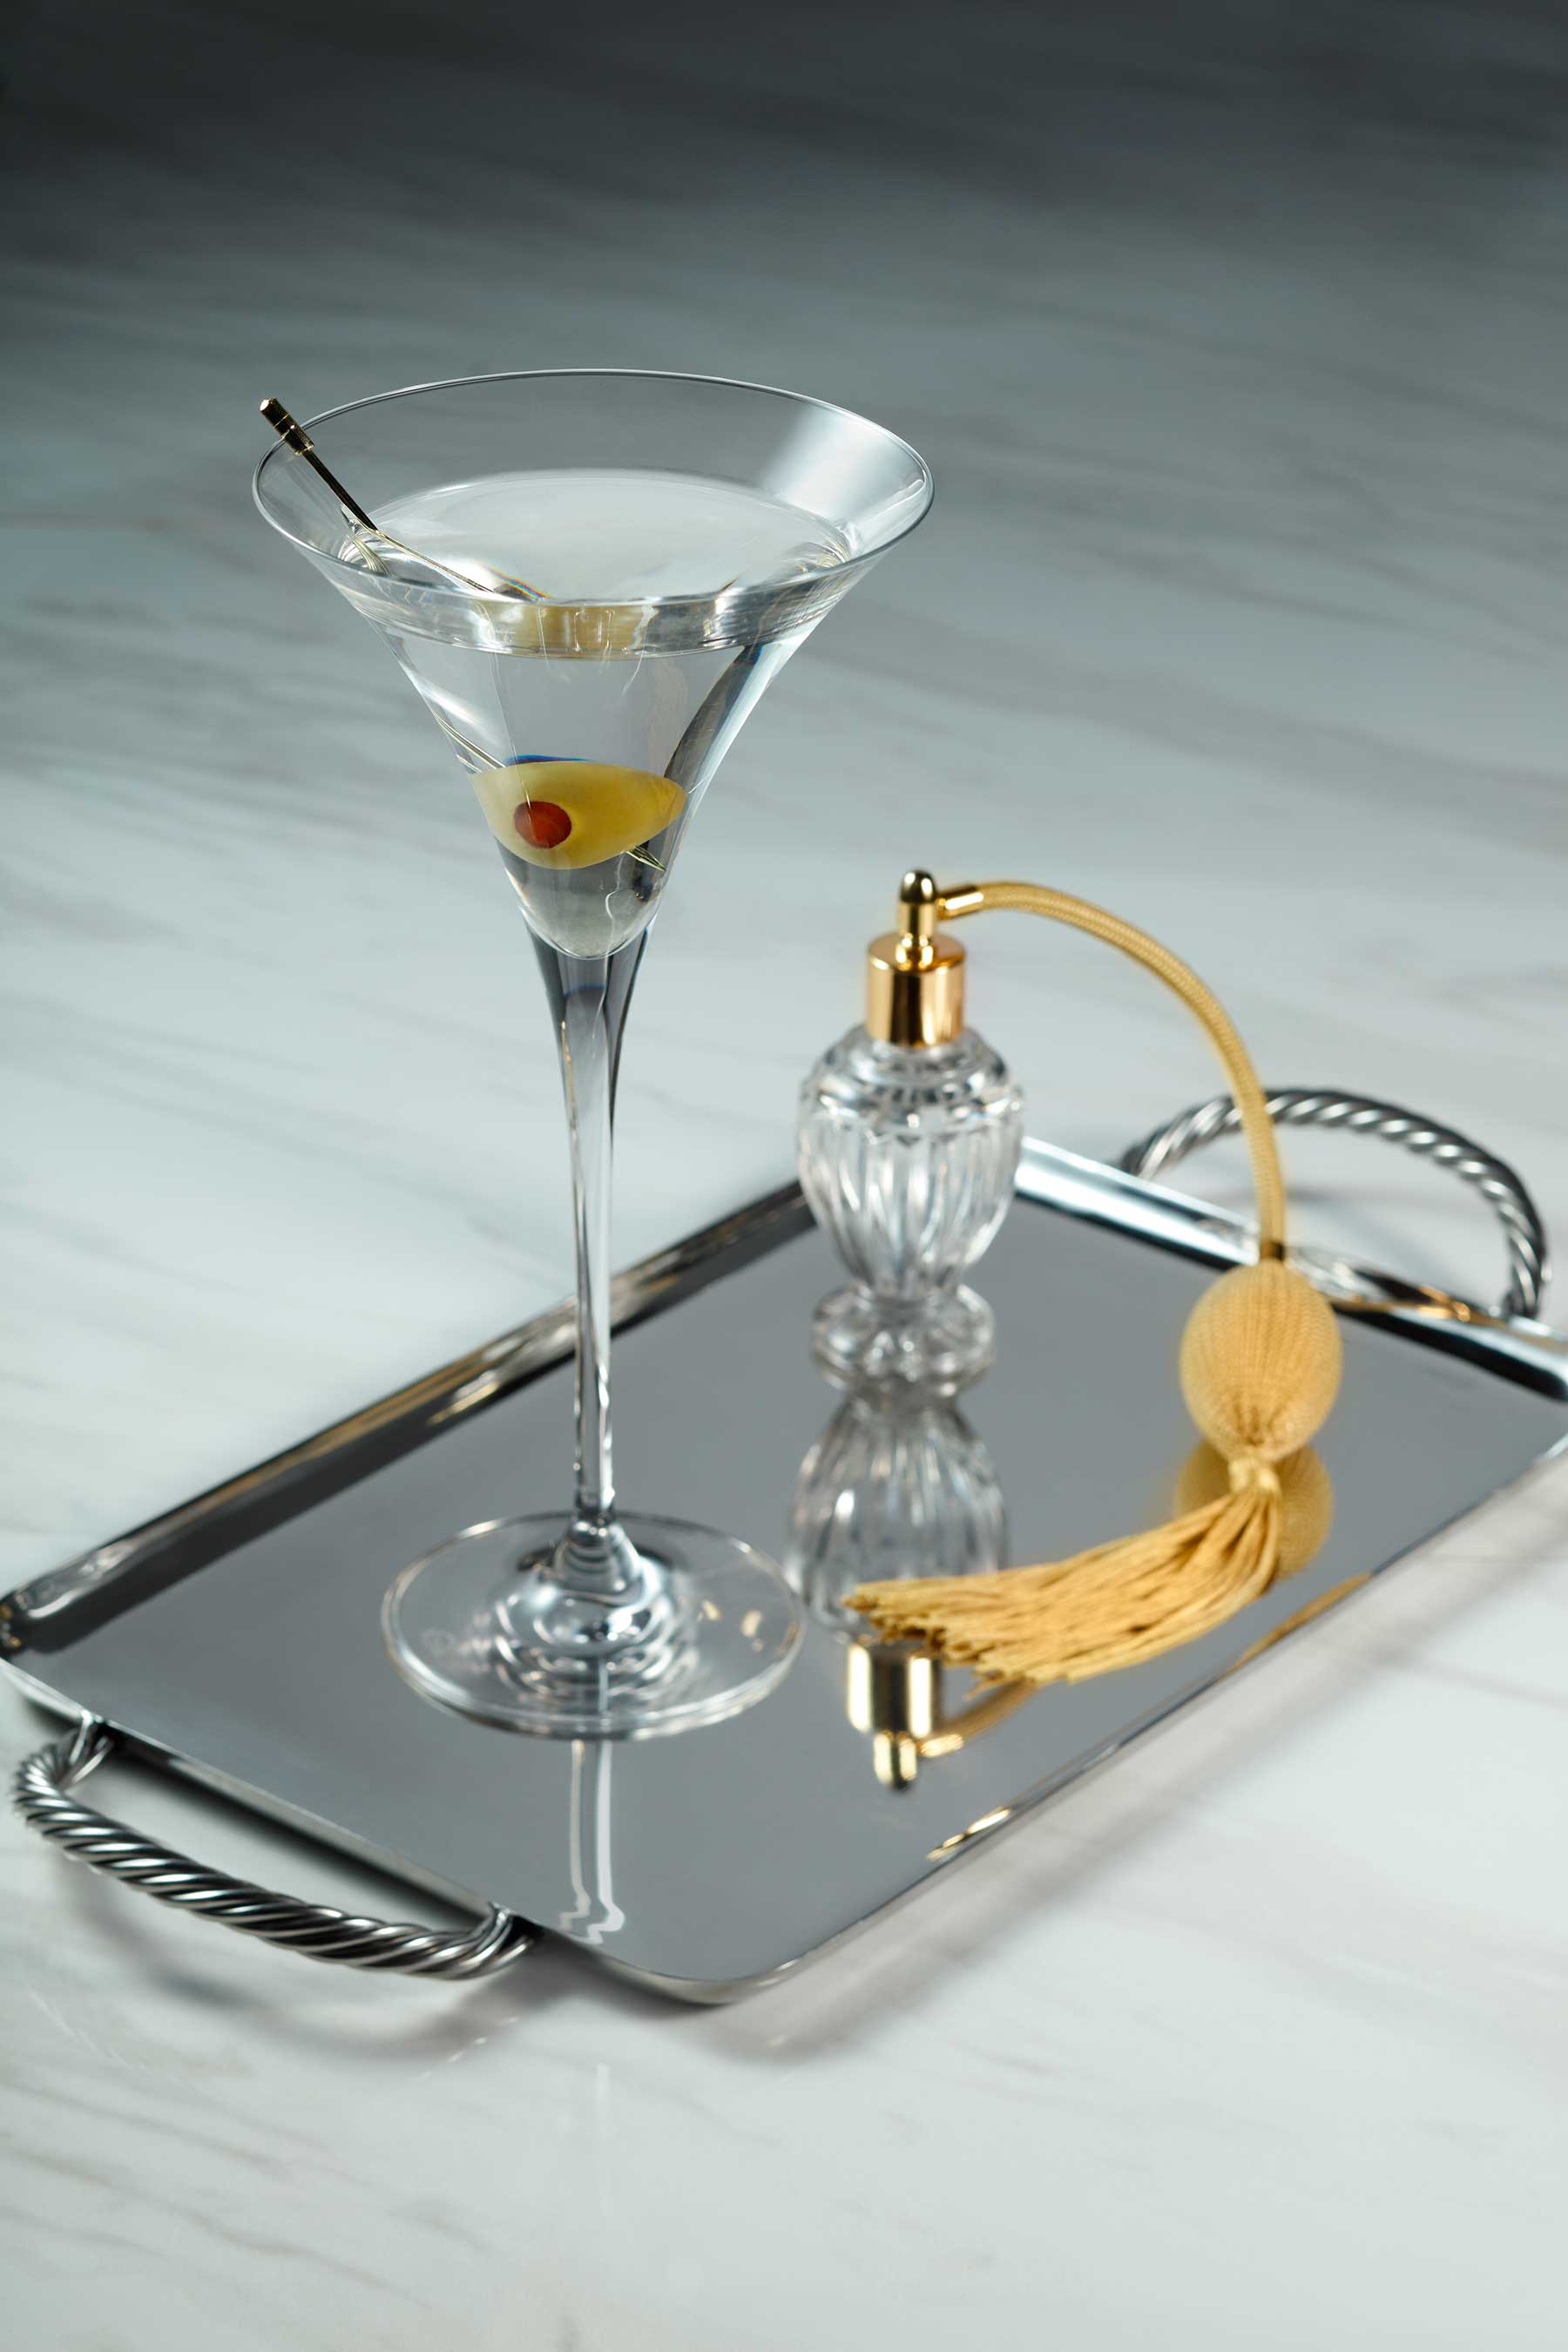 The Mayfair Supper Club's classic Martini at Bellagio served with a choice of olives, twist or onion.